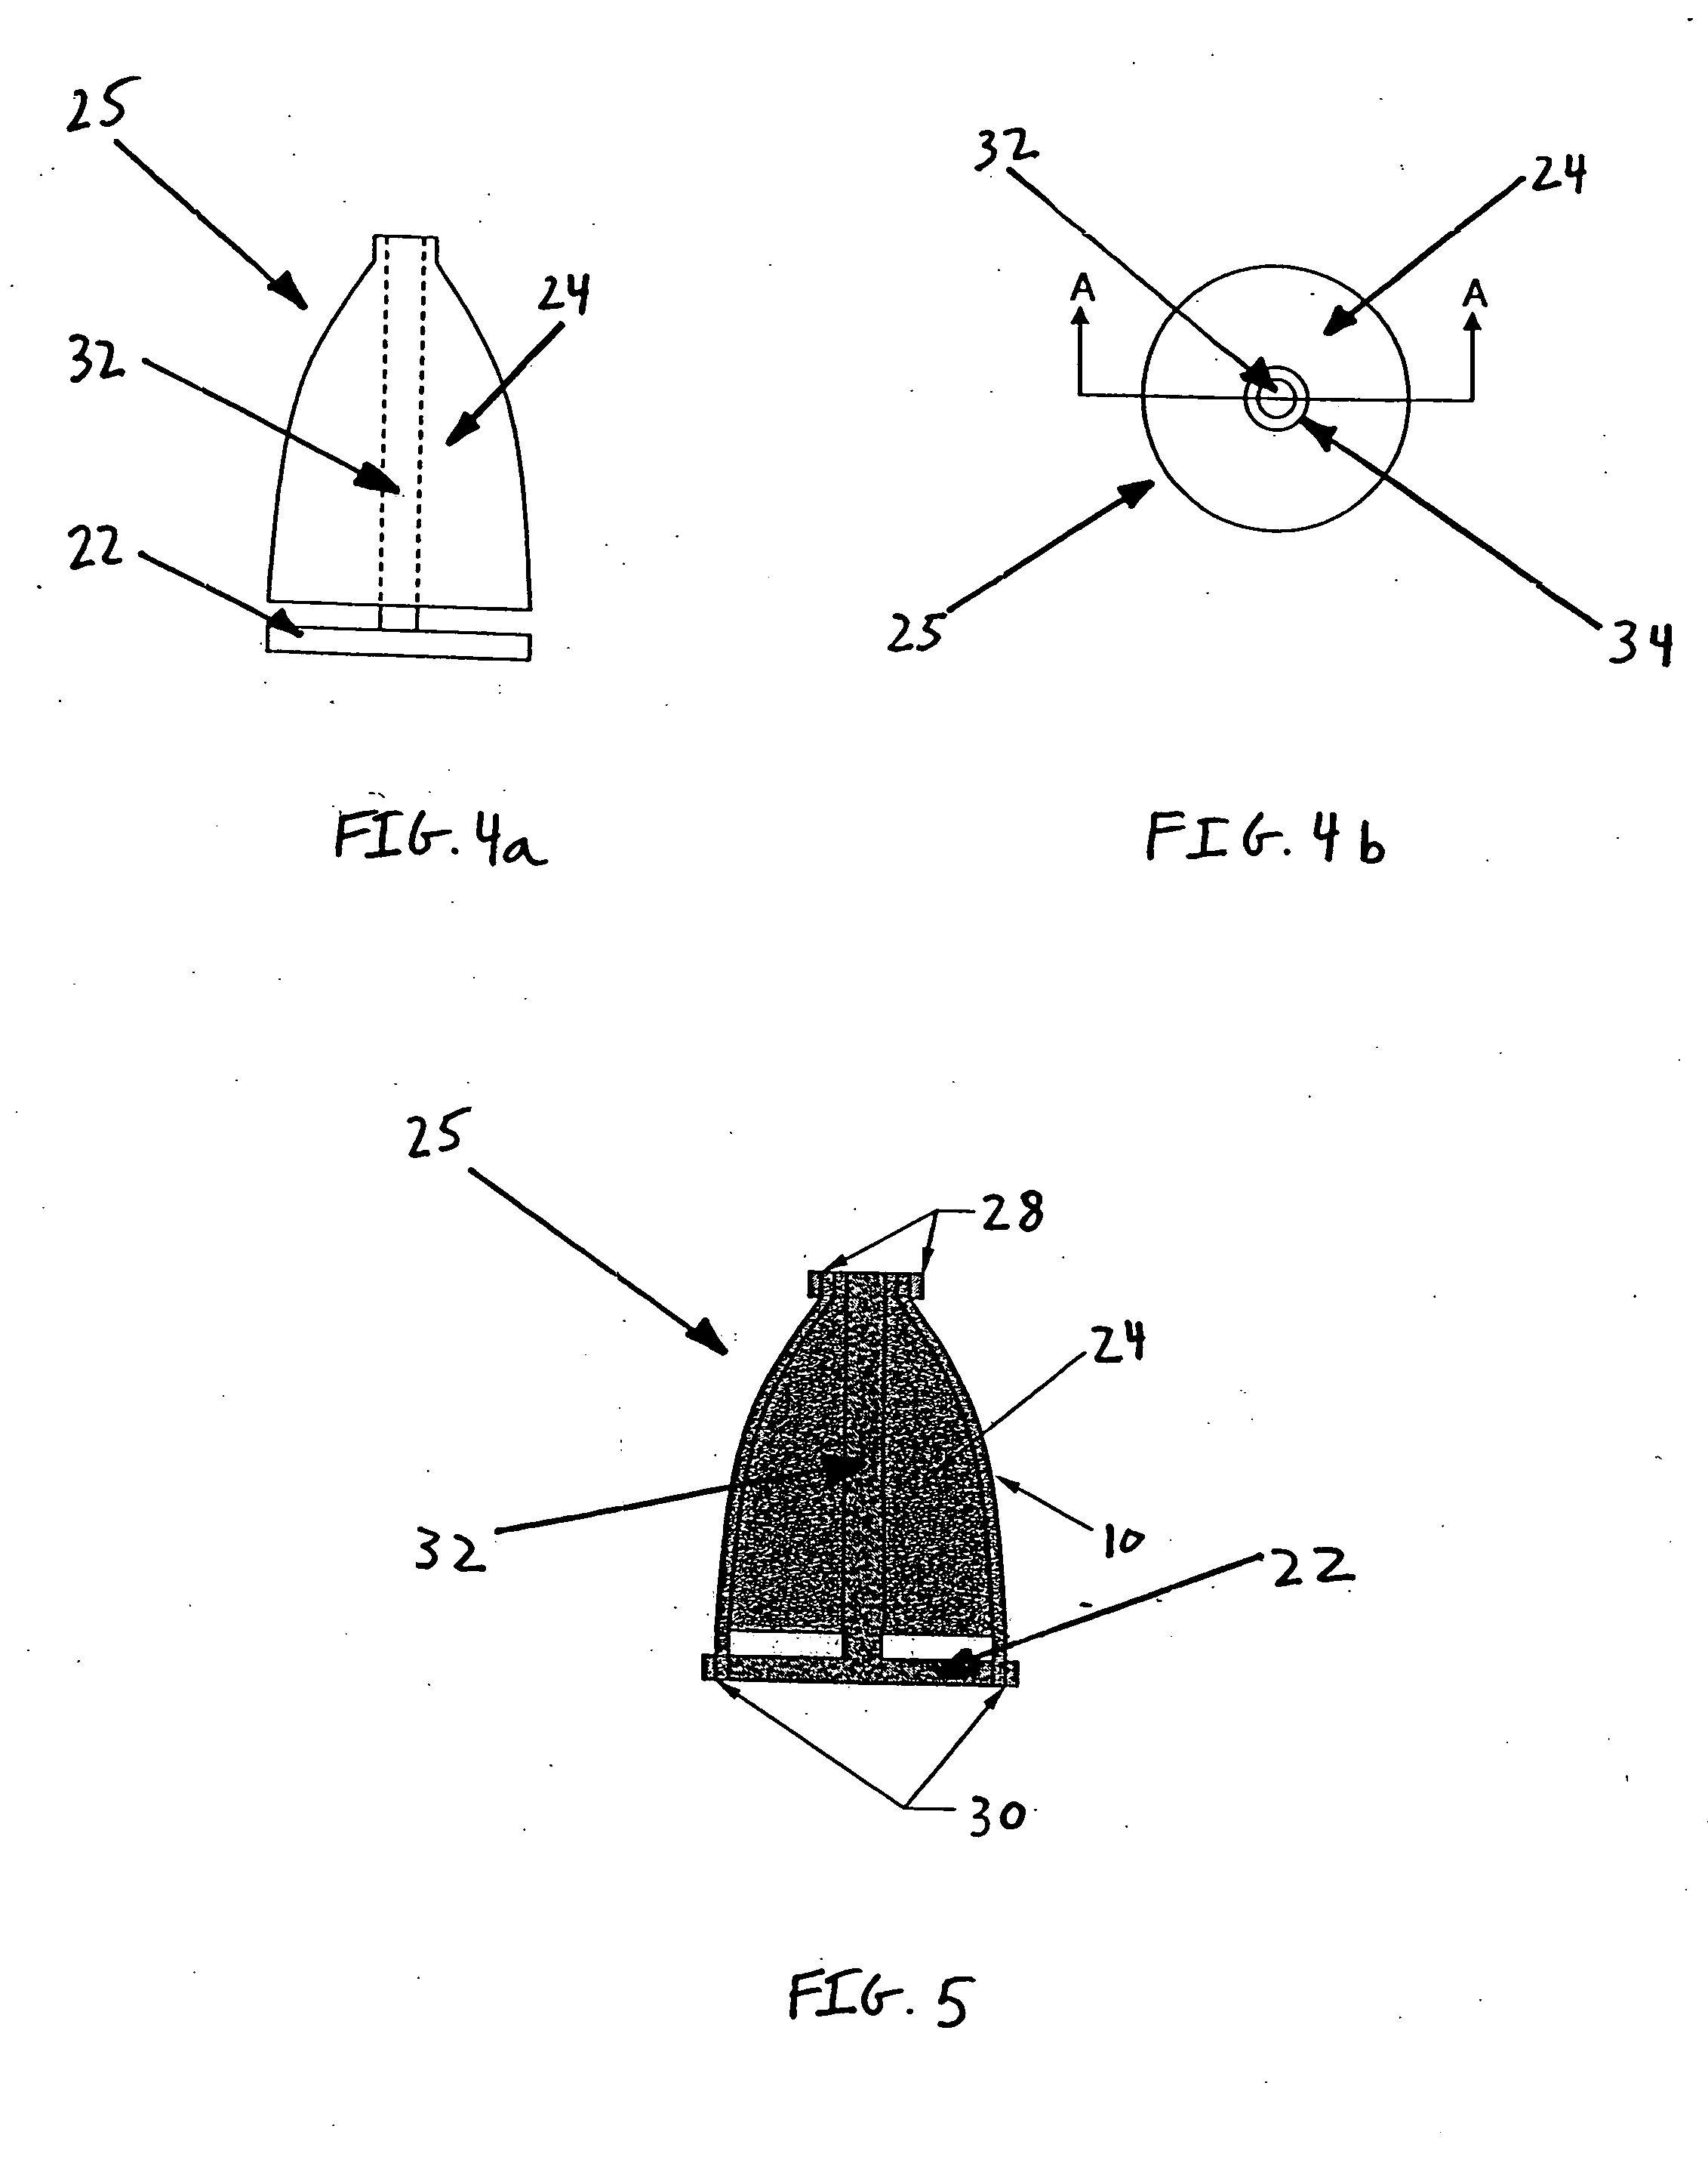 Fabricating symmetric and asymmetric shapes with off-axis reinforcement from symmetric preforms